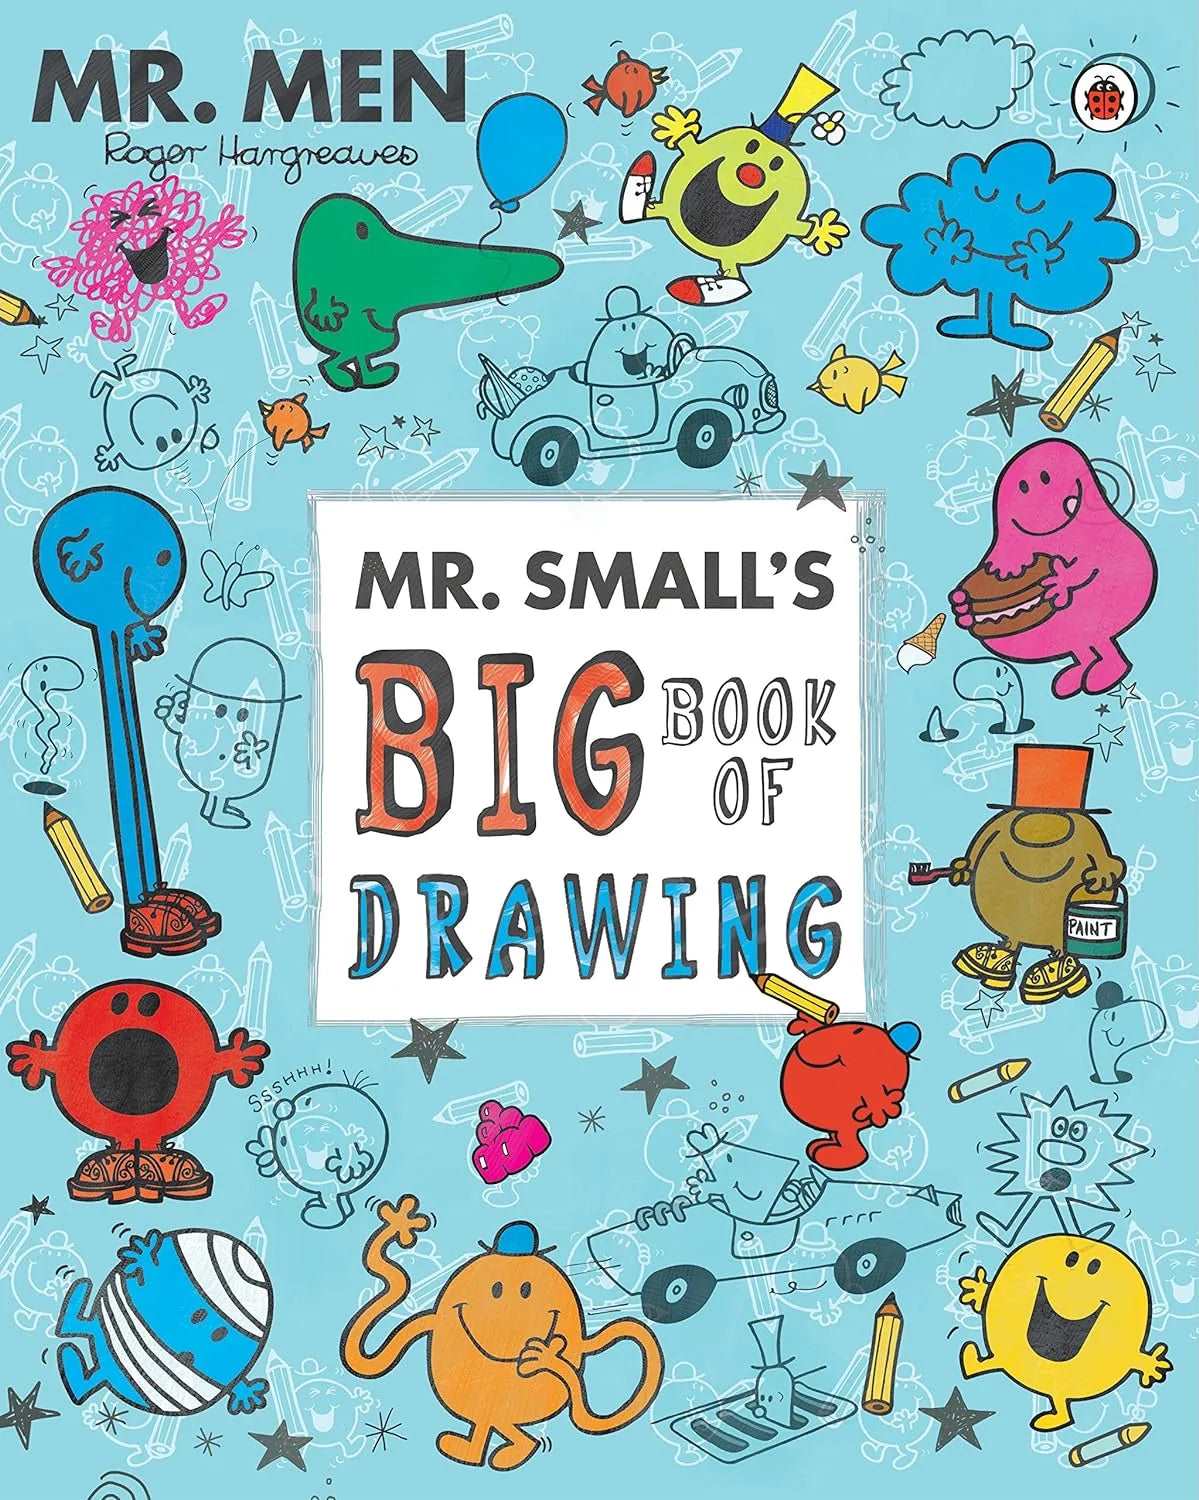 Mr. Small's Big Book of Drawing